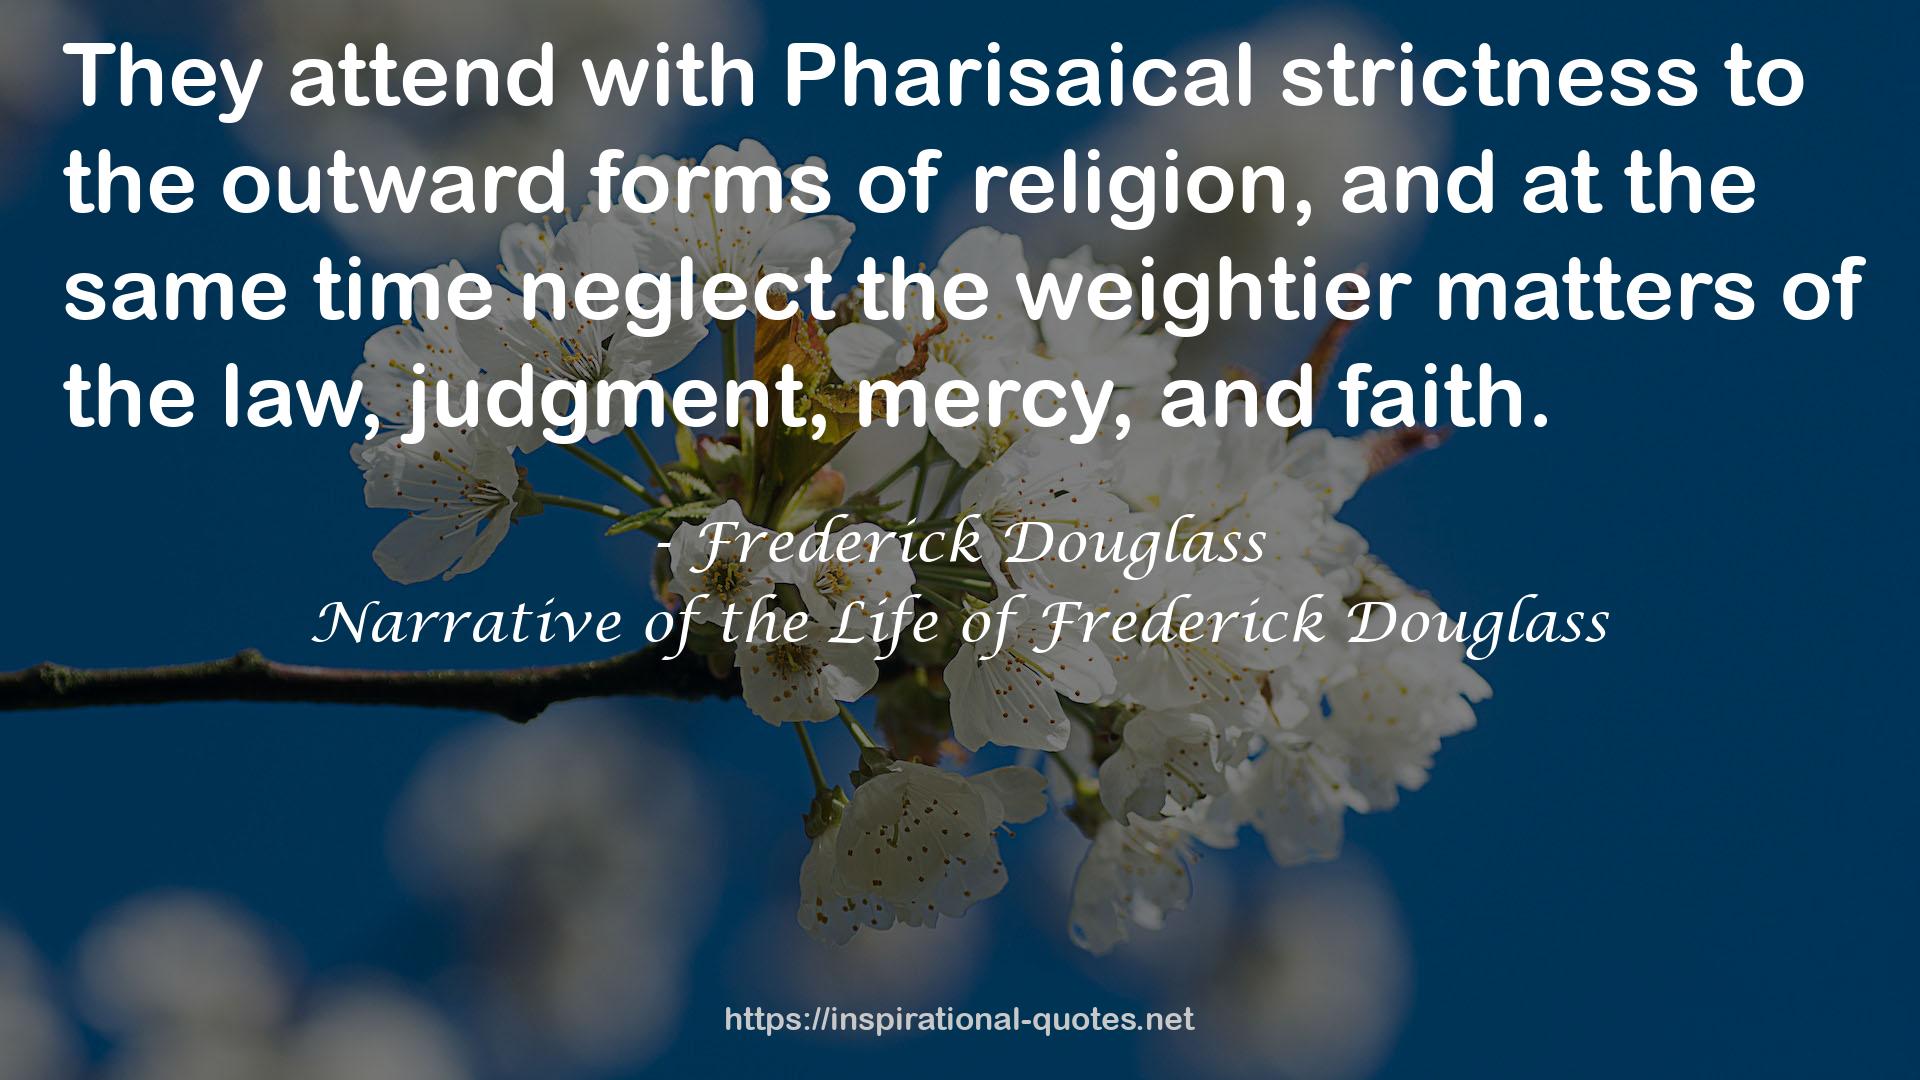 Pharisaical strictness  QUOTES